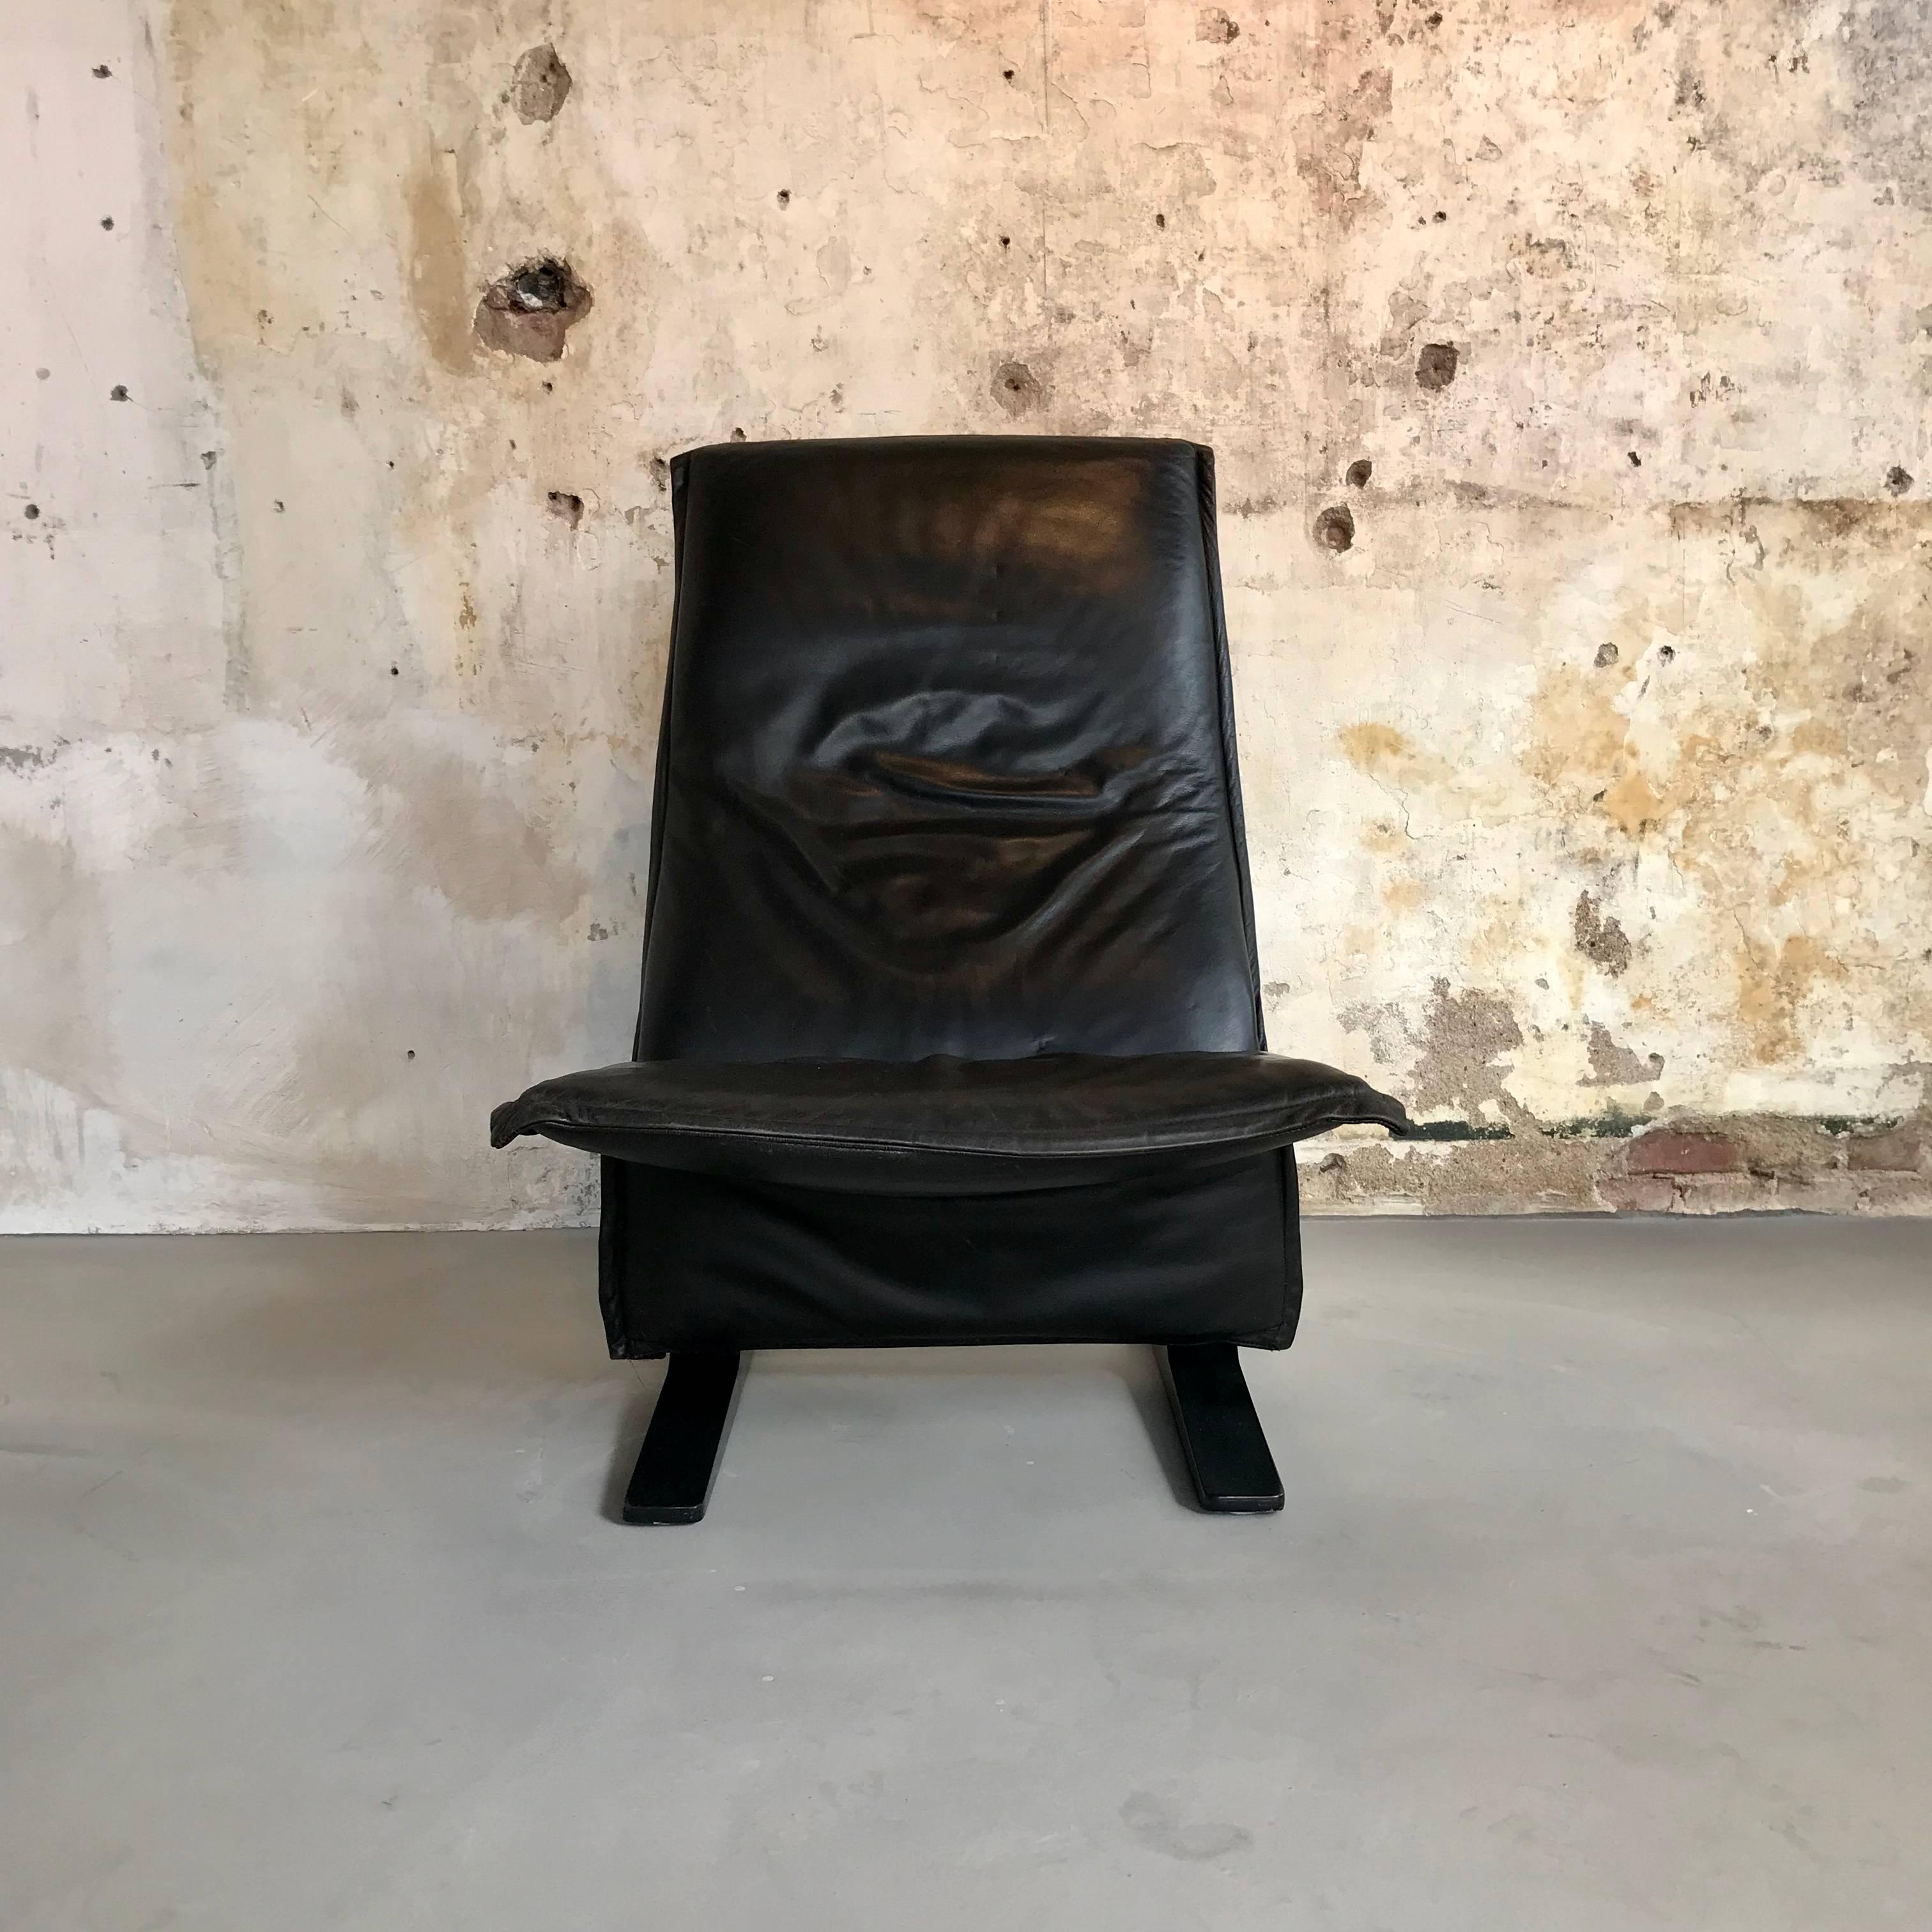 Magnificent vintage Artifort lounge chair by Pierre Paulin.
Original 1960s black leather Concorde (F784) lounge chair by Pierre Paulin with piping and aluminium base in black powder coating. 

Originally designed for the waiting room of the